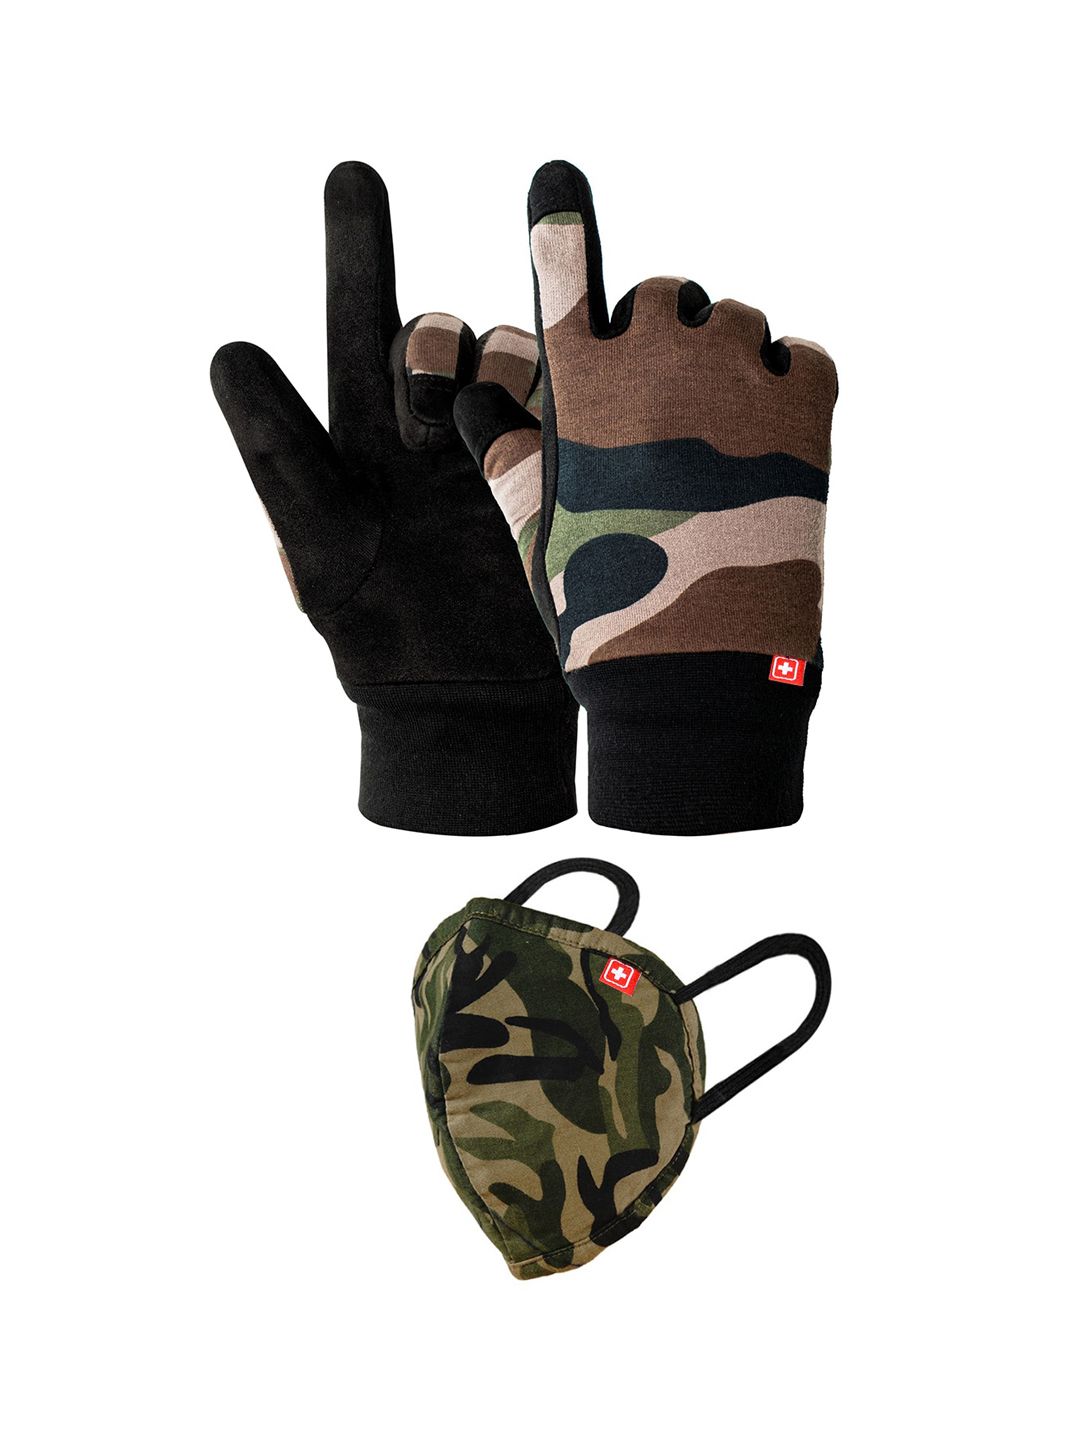 SWISS MILITARY Olive-Green & Beige Printed 3-Ply Reusable Protection Gloves & Alphaguard Mask Combo Kit Price in India